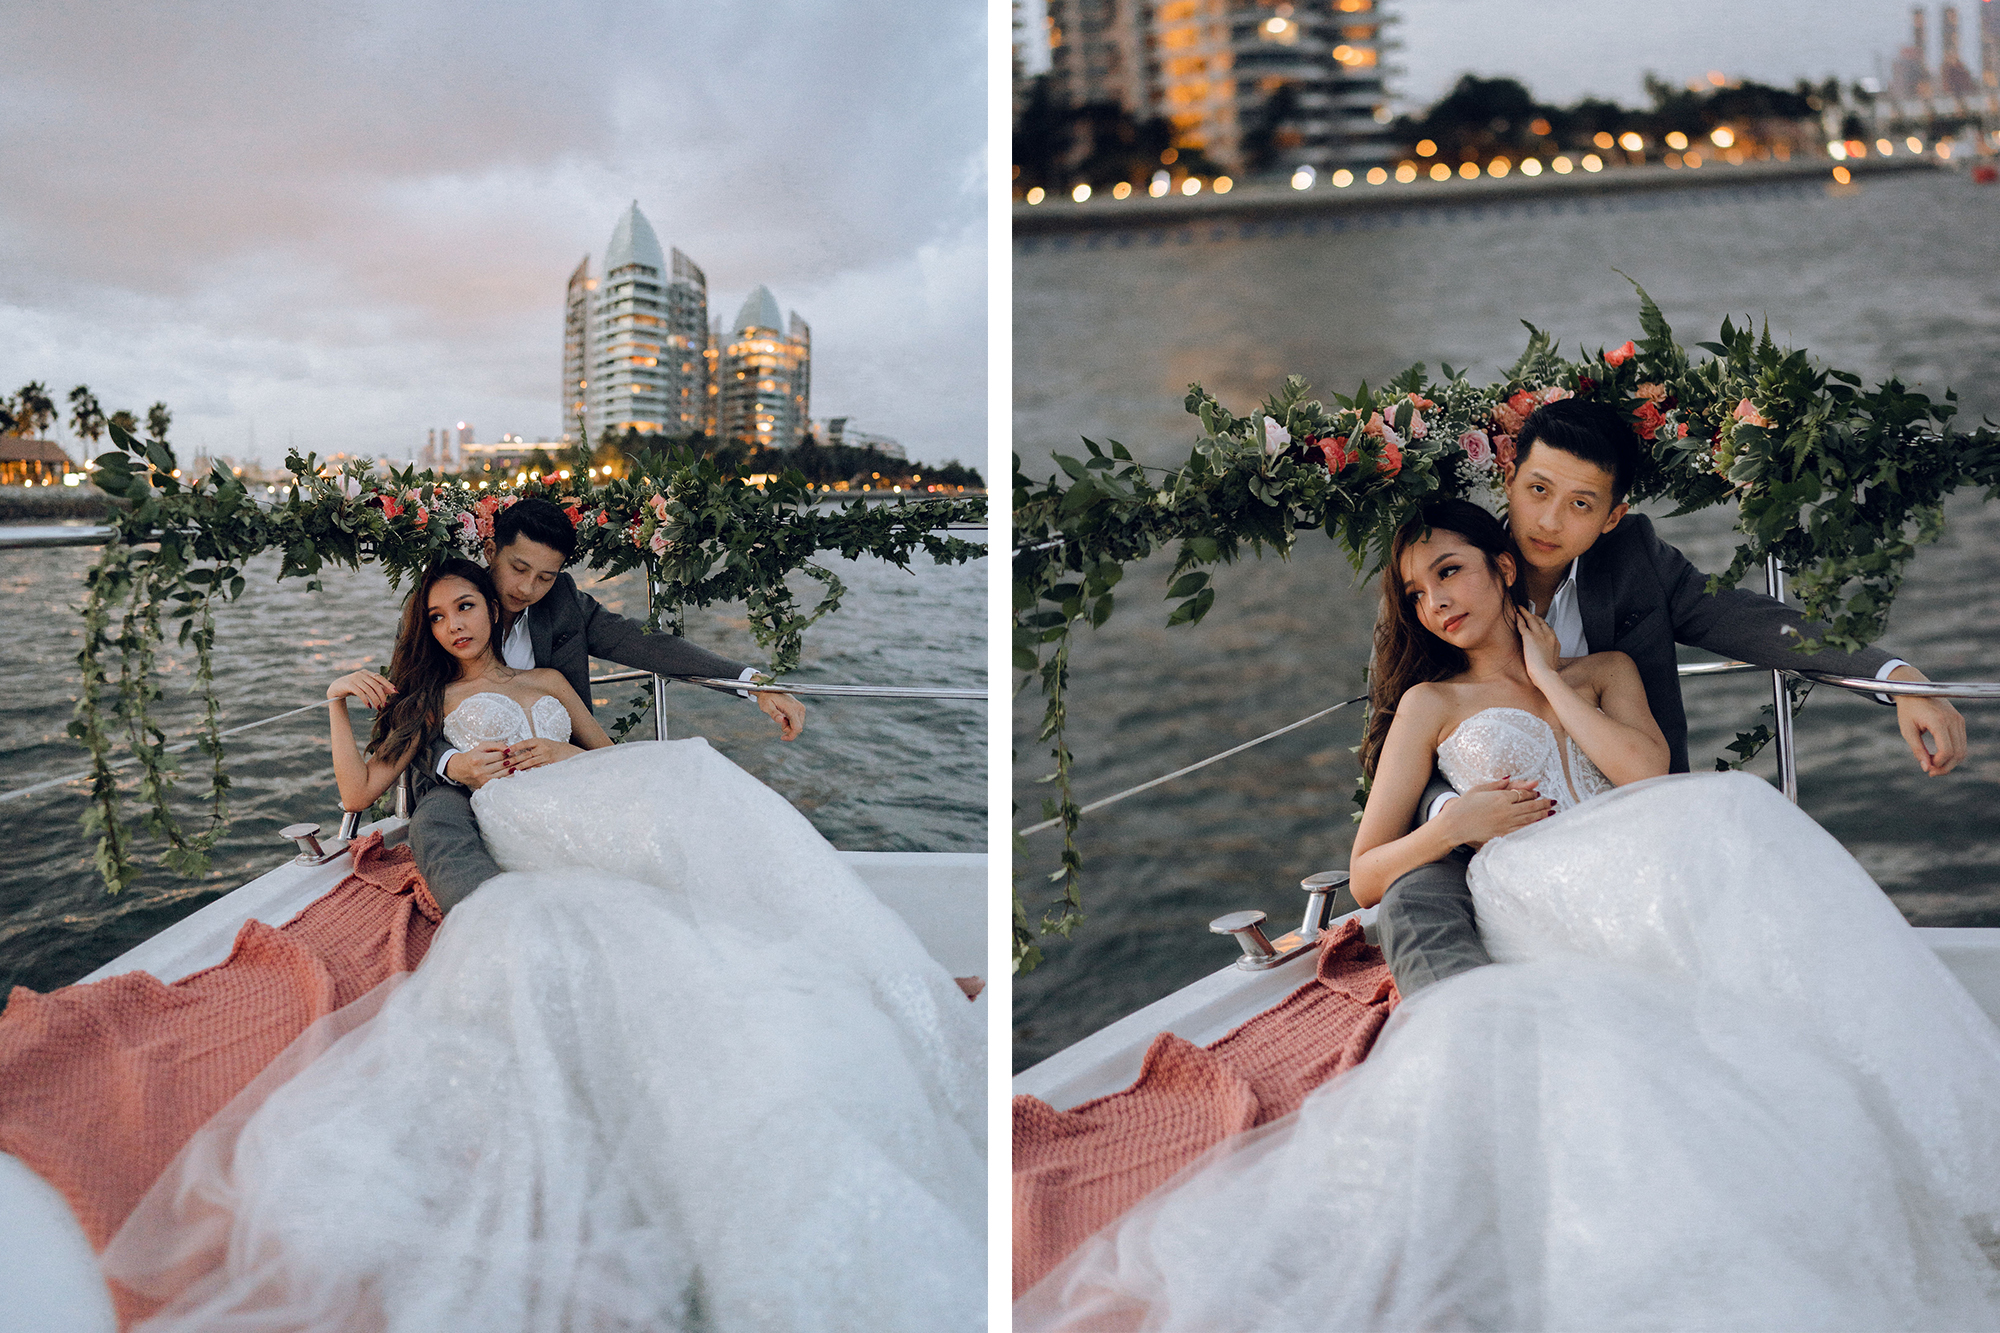 Sunset Prewedding Photoshoot On A Yacht With Romantic Floral Styling by Samantha on OneThreeOneFour 28